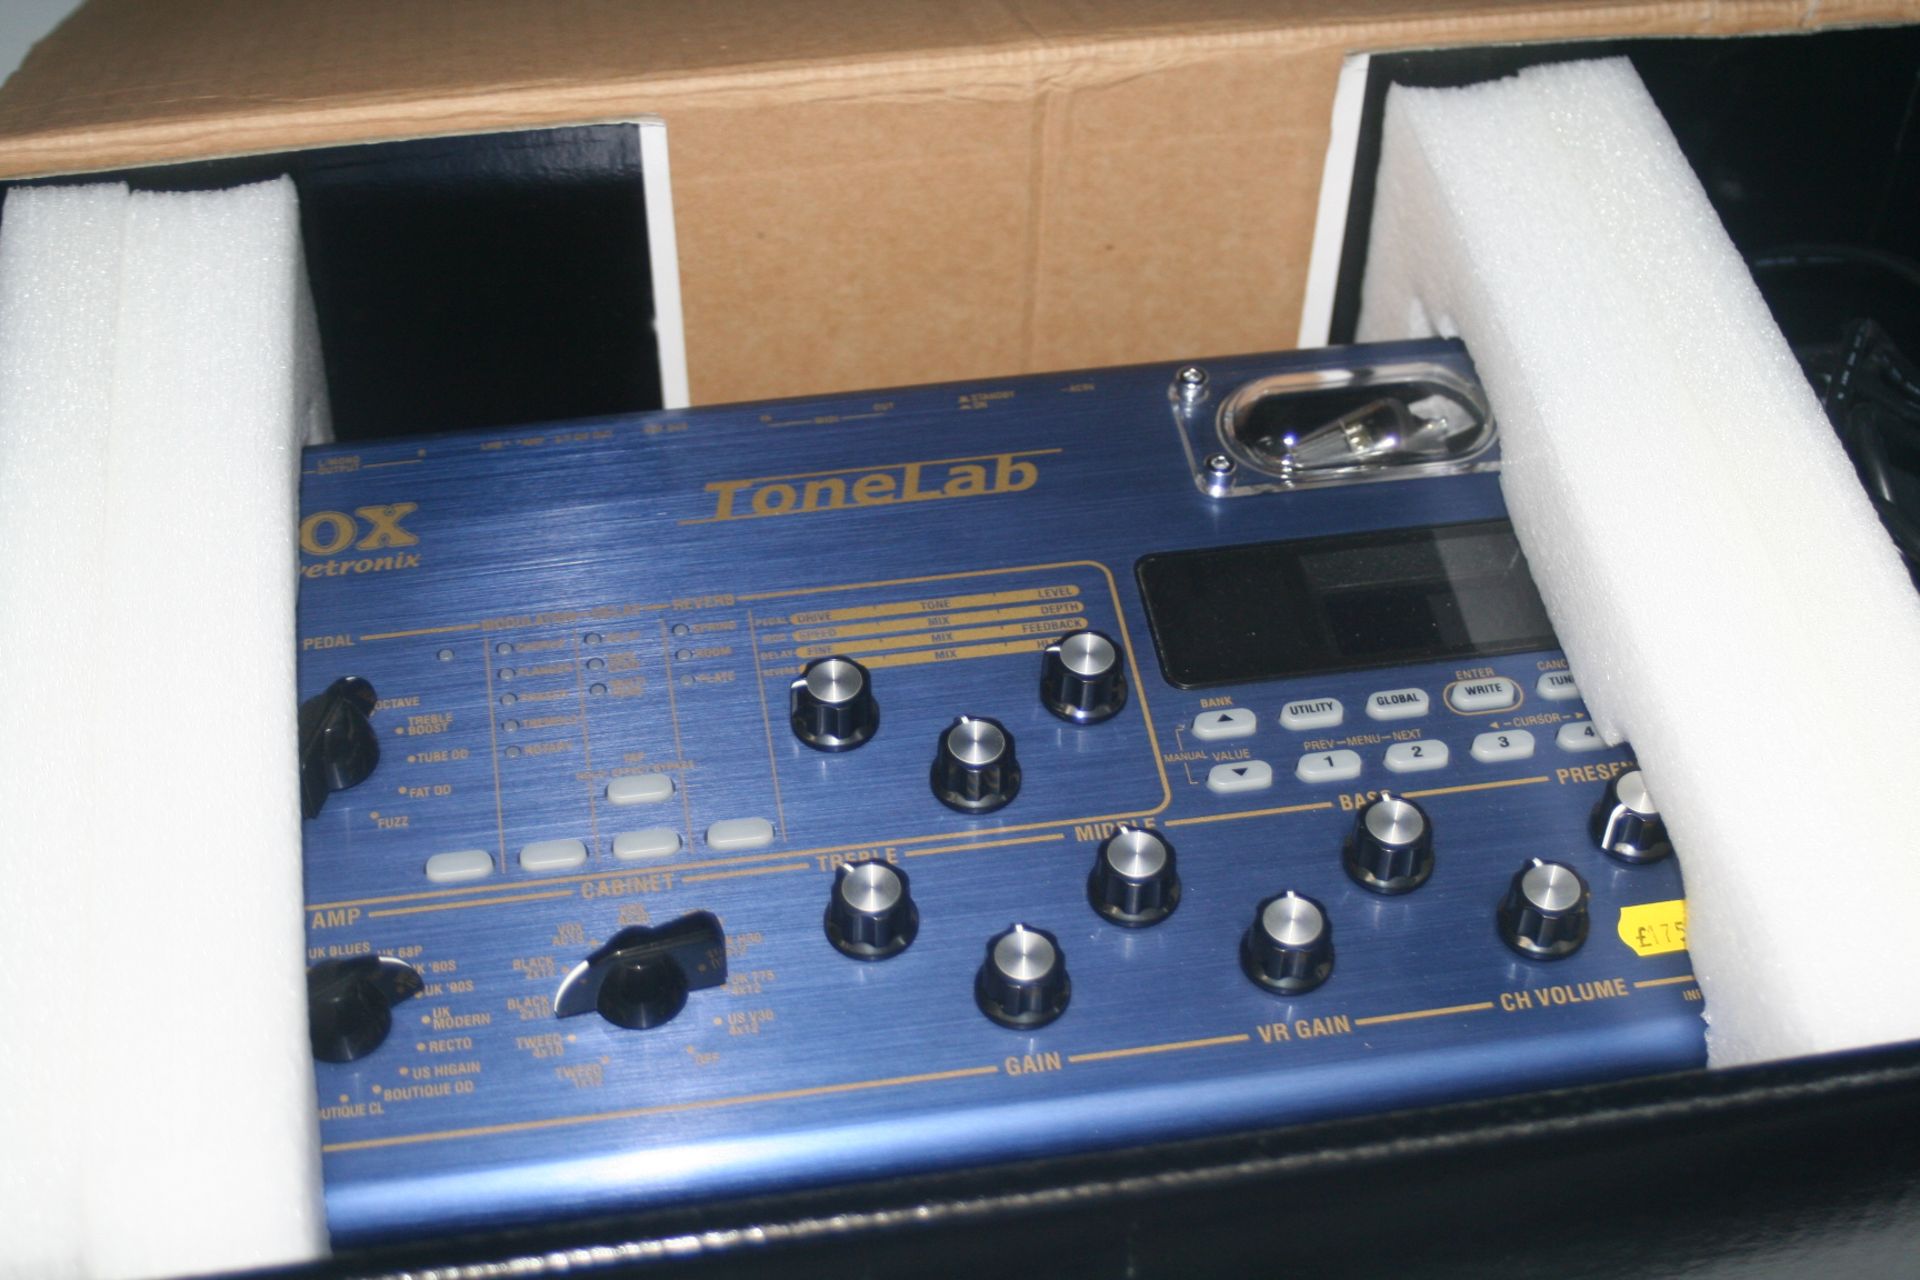 1 x Vox Valvetronix Tone Lab Guitar Amp Modelling Effects Unit – Ex Display Model – Boxed – Comes - Image 2 of 15